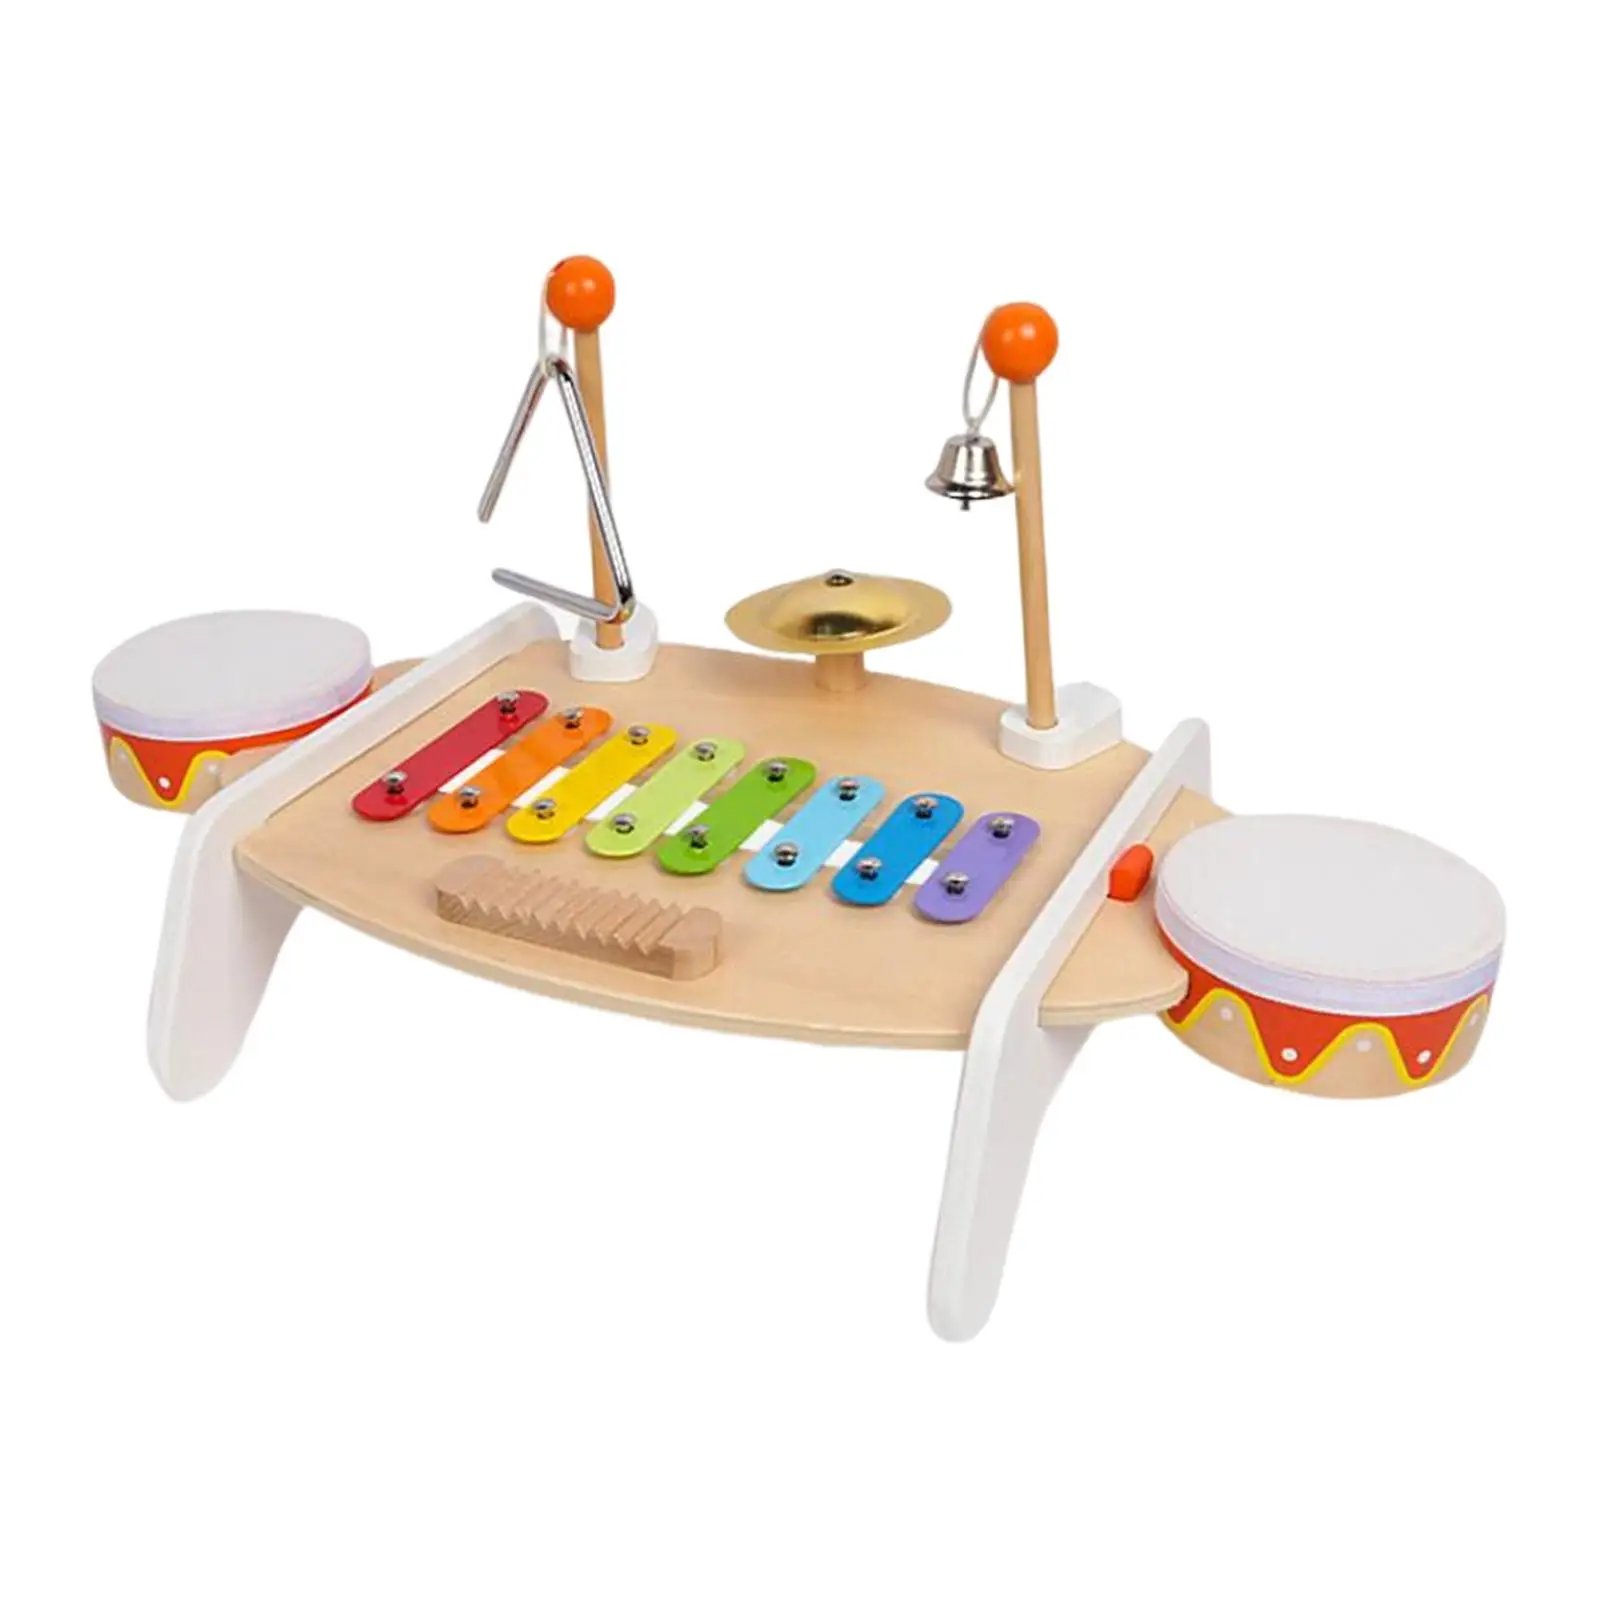 Multifunction Xylophone Musical Toy Musical Instruments Wooden Percussion Toy for Boys